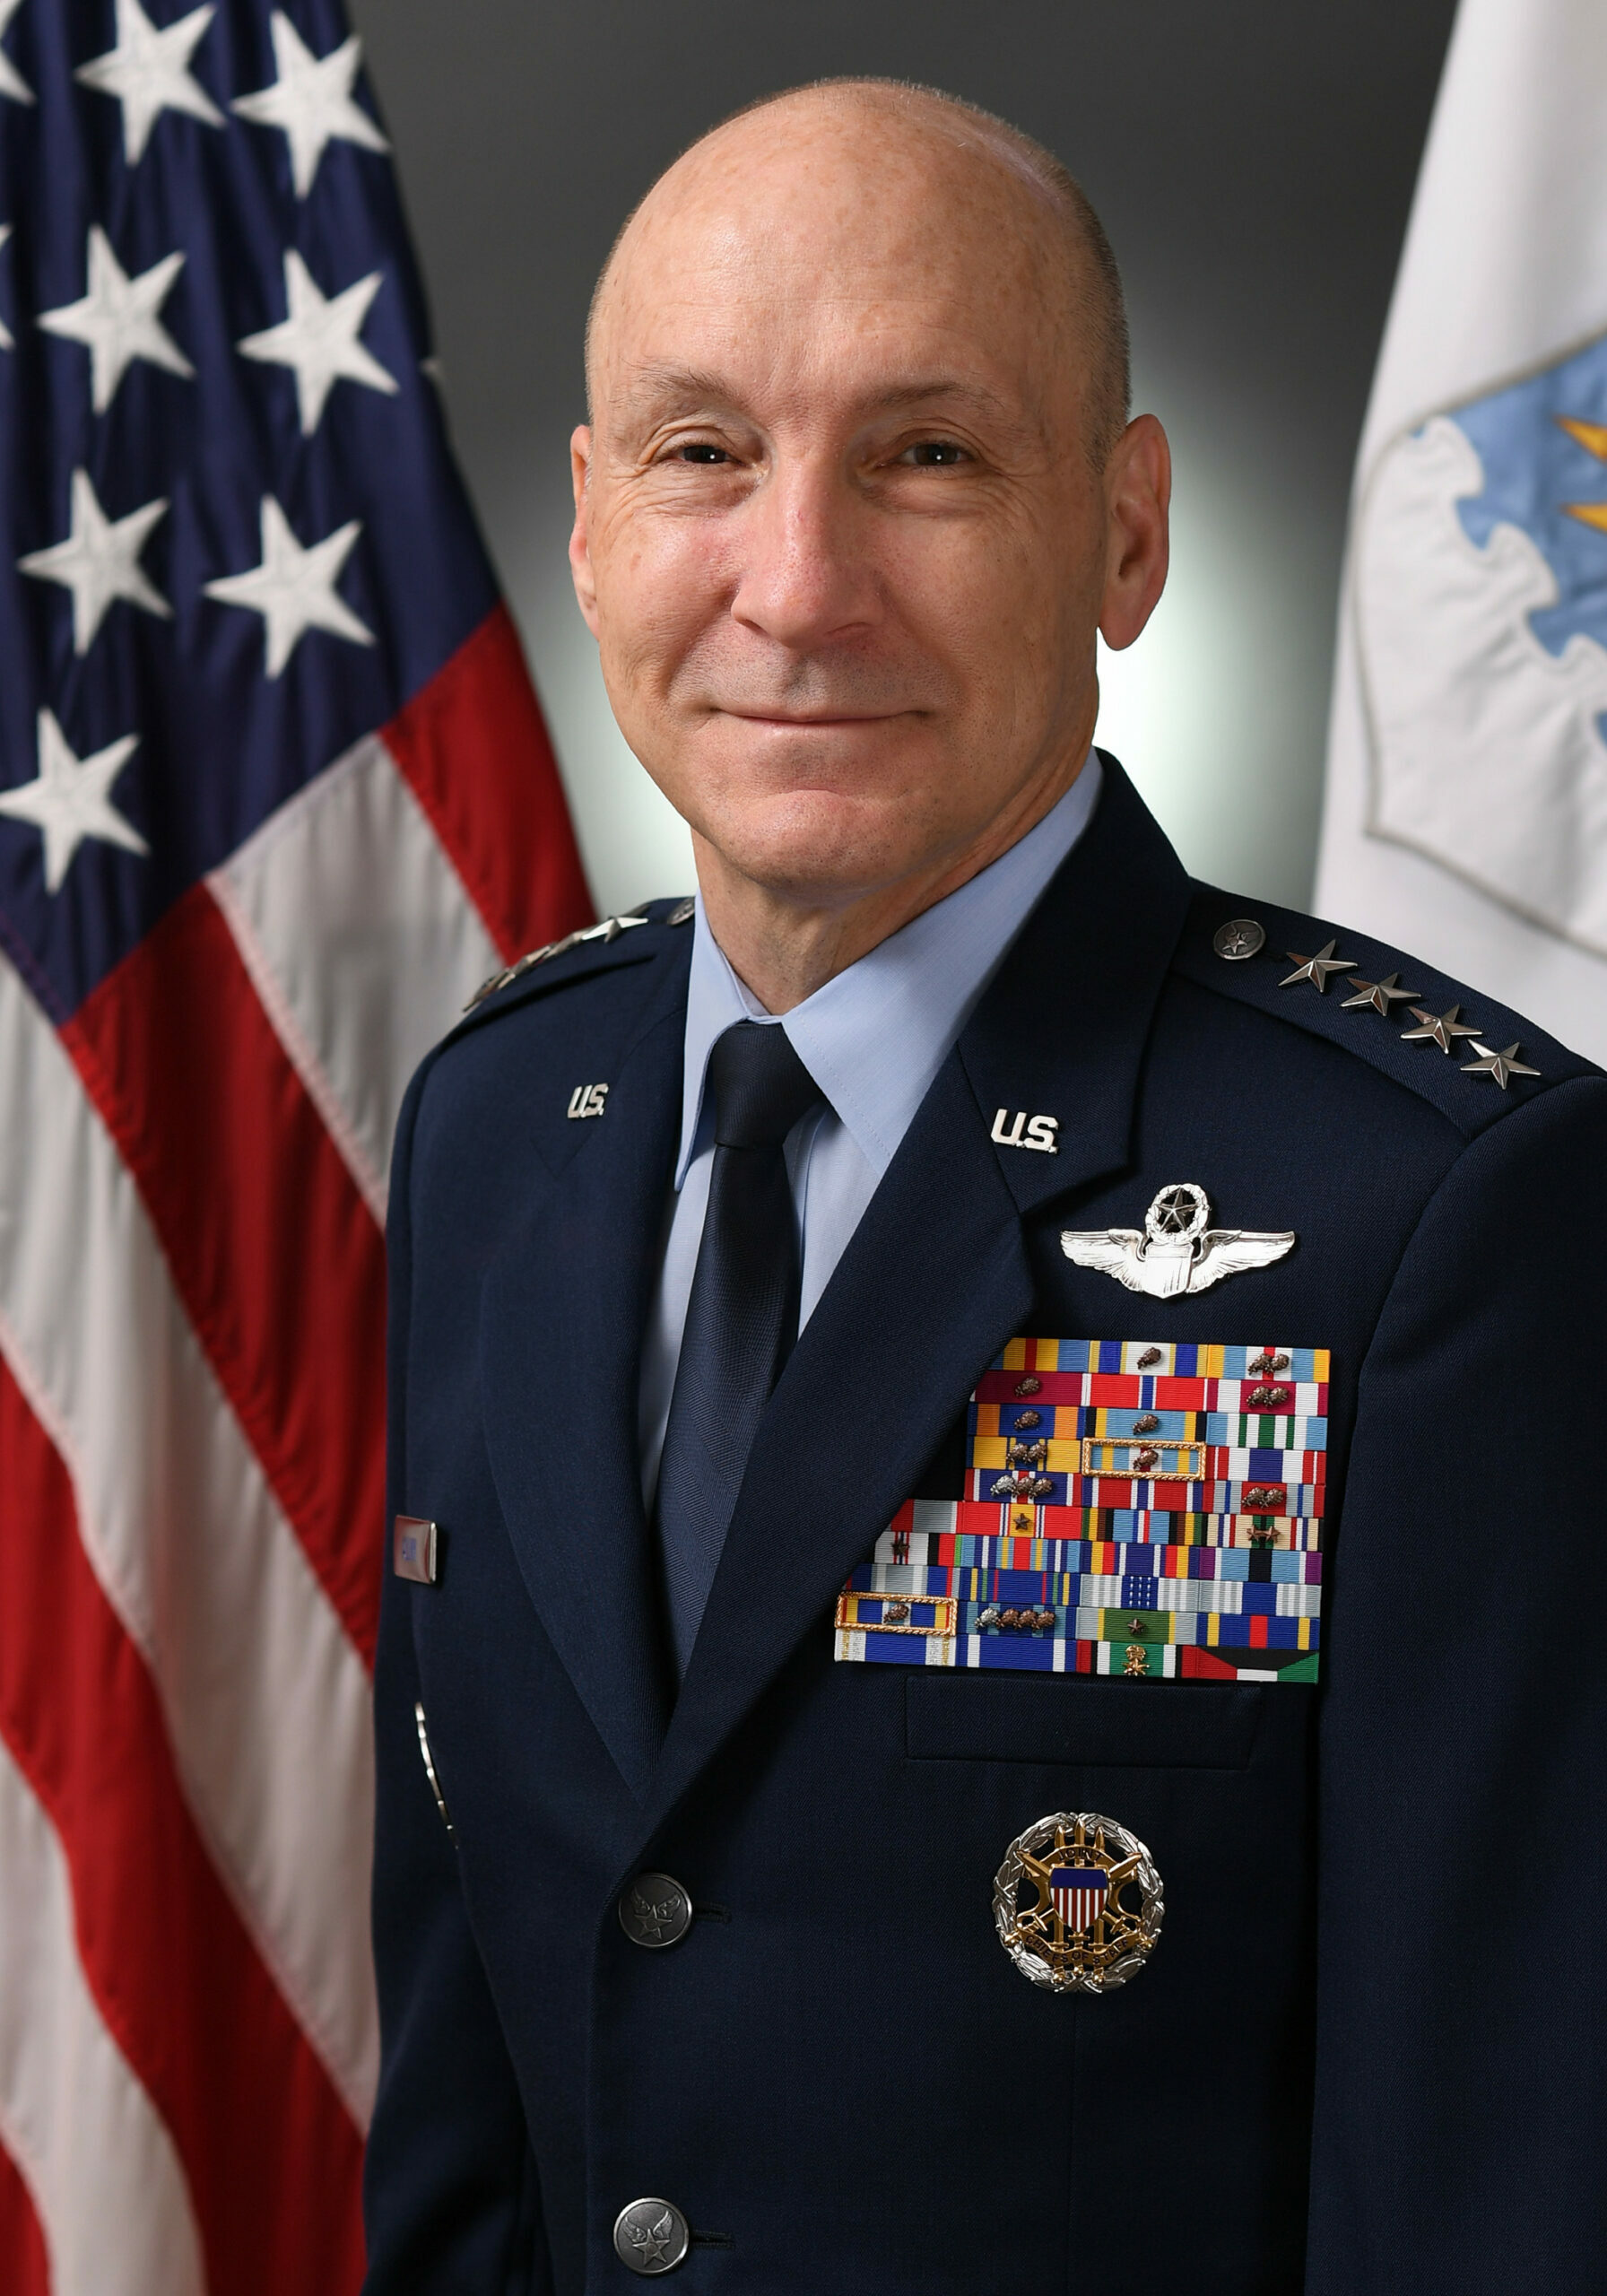 Air Force Chief of Staff Gen. David W. Allvin Official Portrait (U.S. Air Force photo by Andy Morataya)